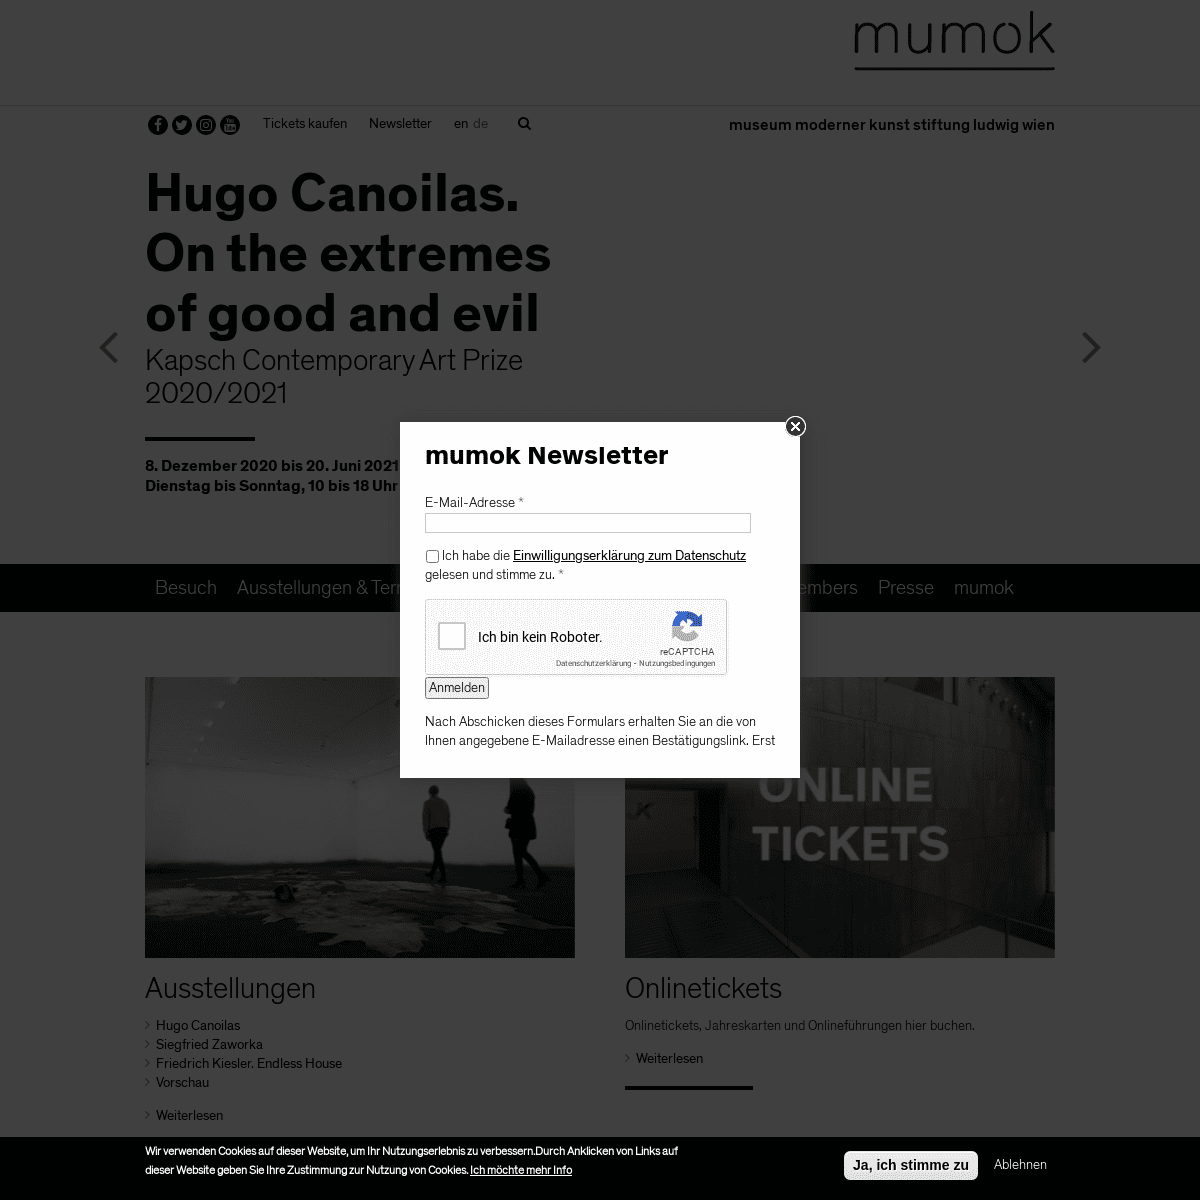 A complete backup of https://mumok.at